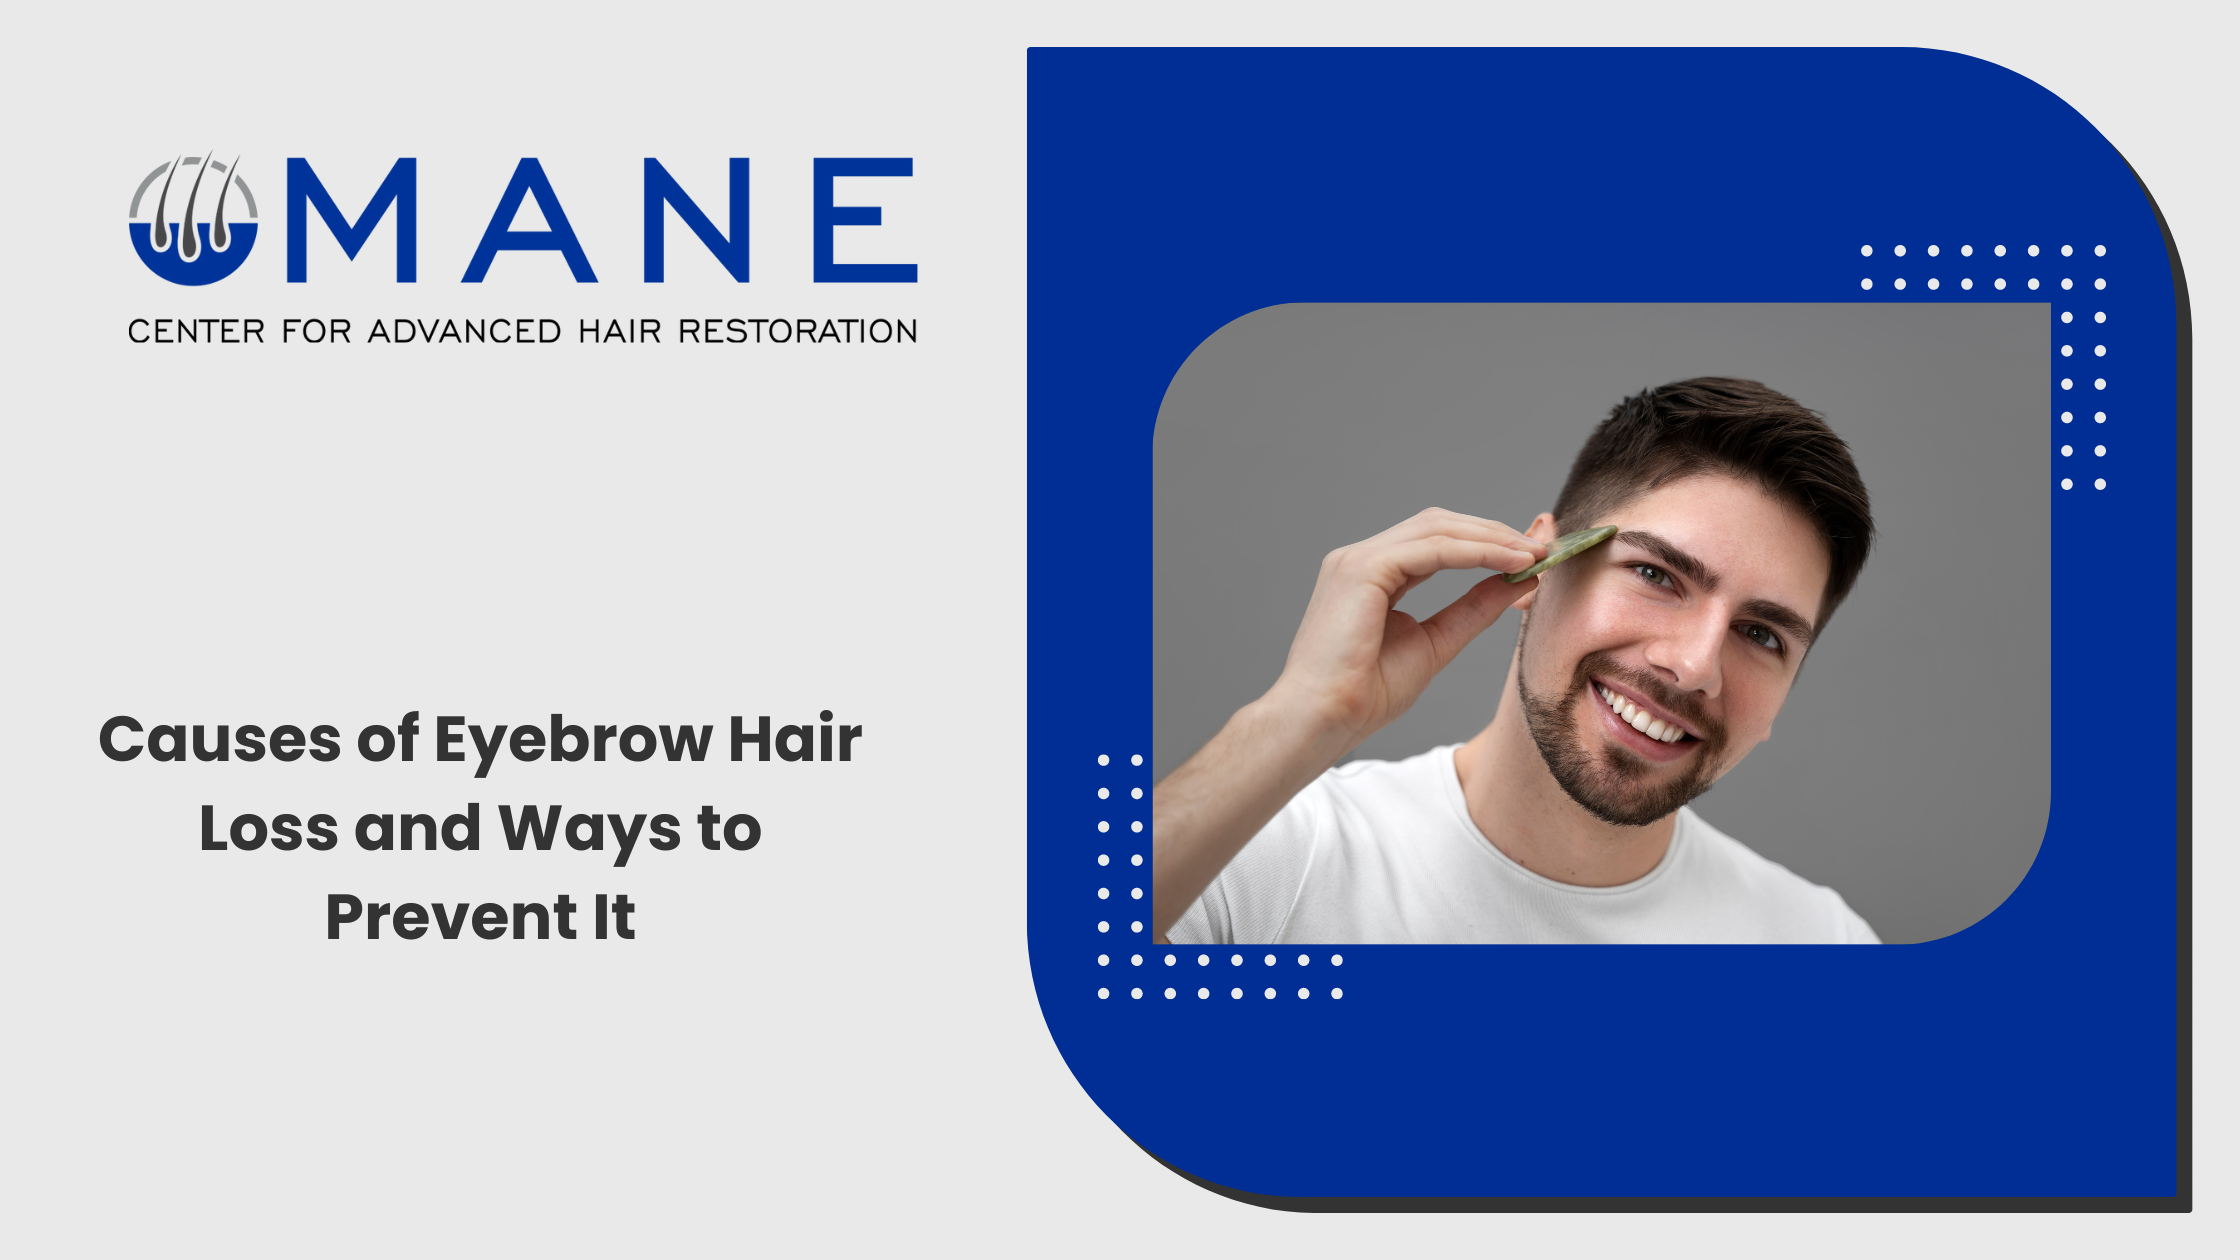 Causes of Eyebrow Hair Loss and Ways to Prevent It